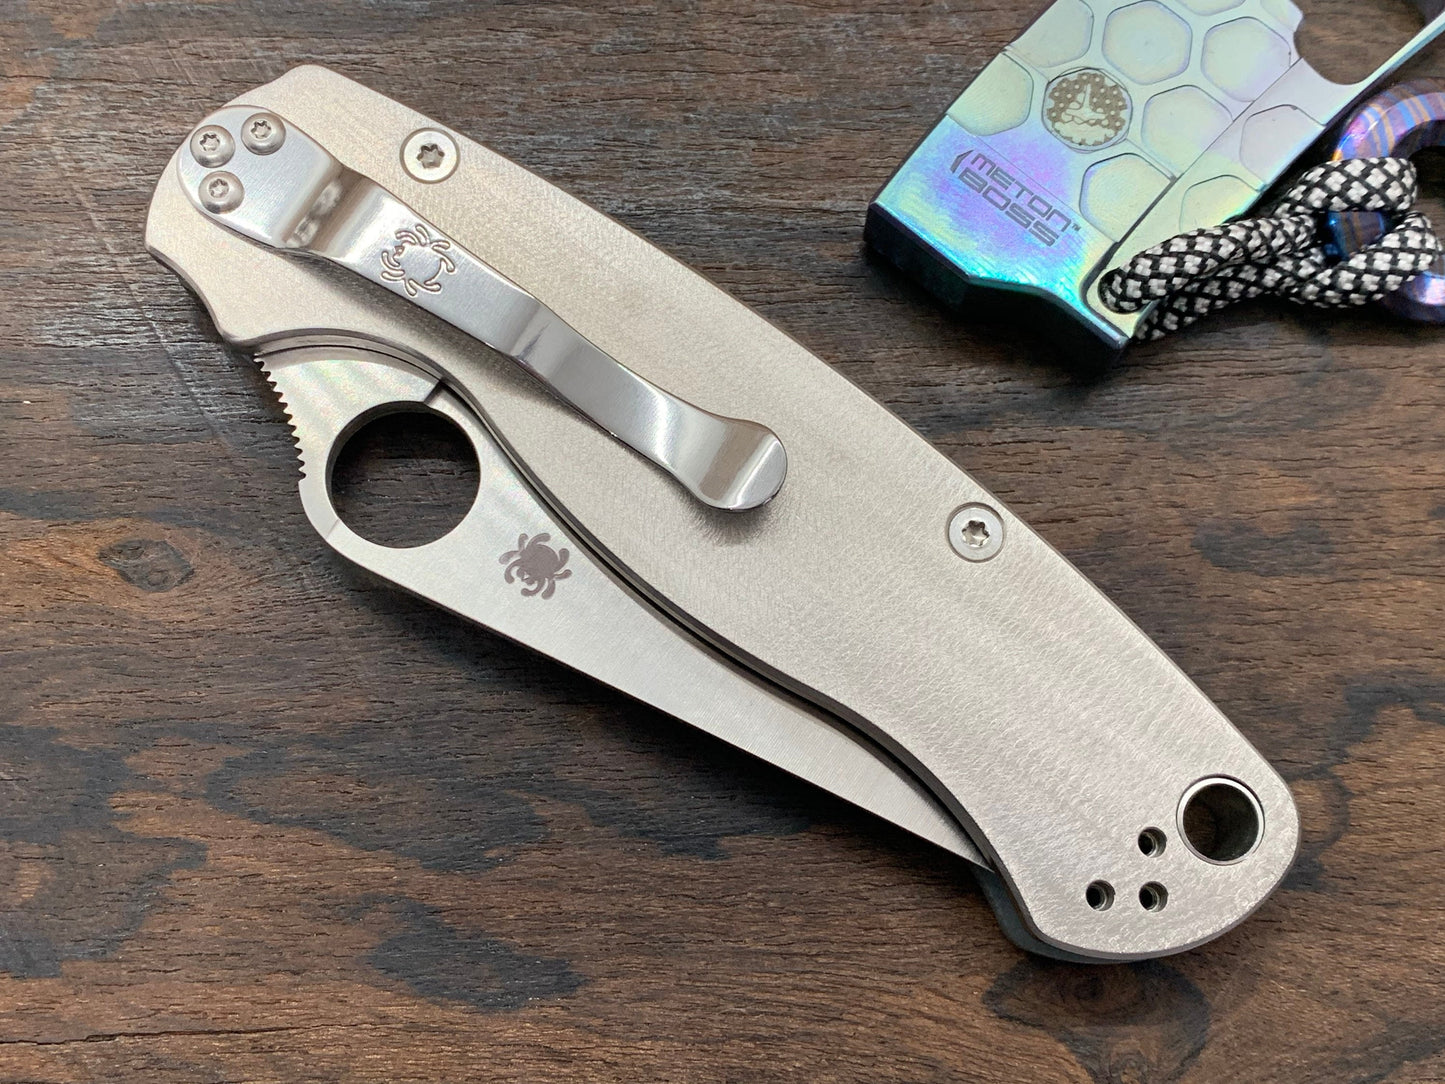 Proprietary Deep Brushed Titanium Scales for Spyderco Paramilitary 2 PM2